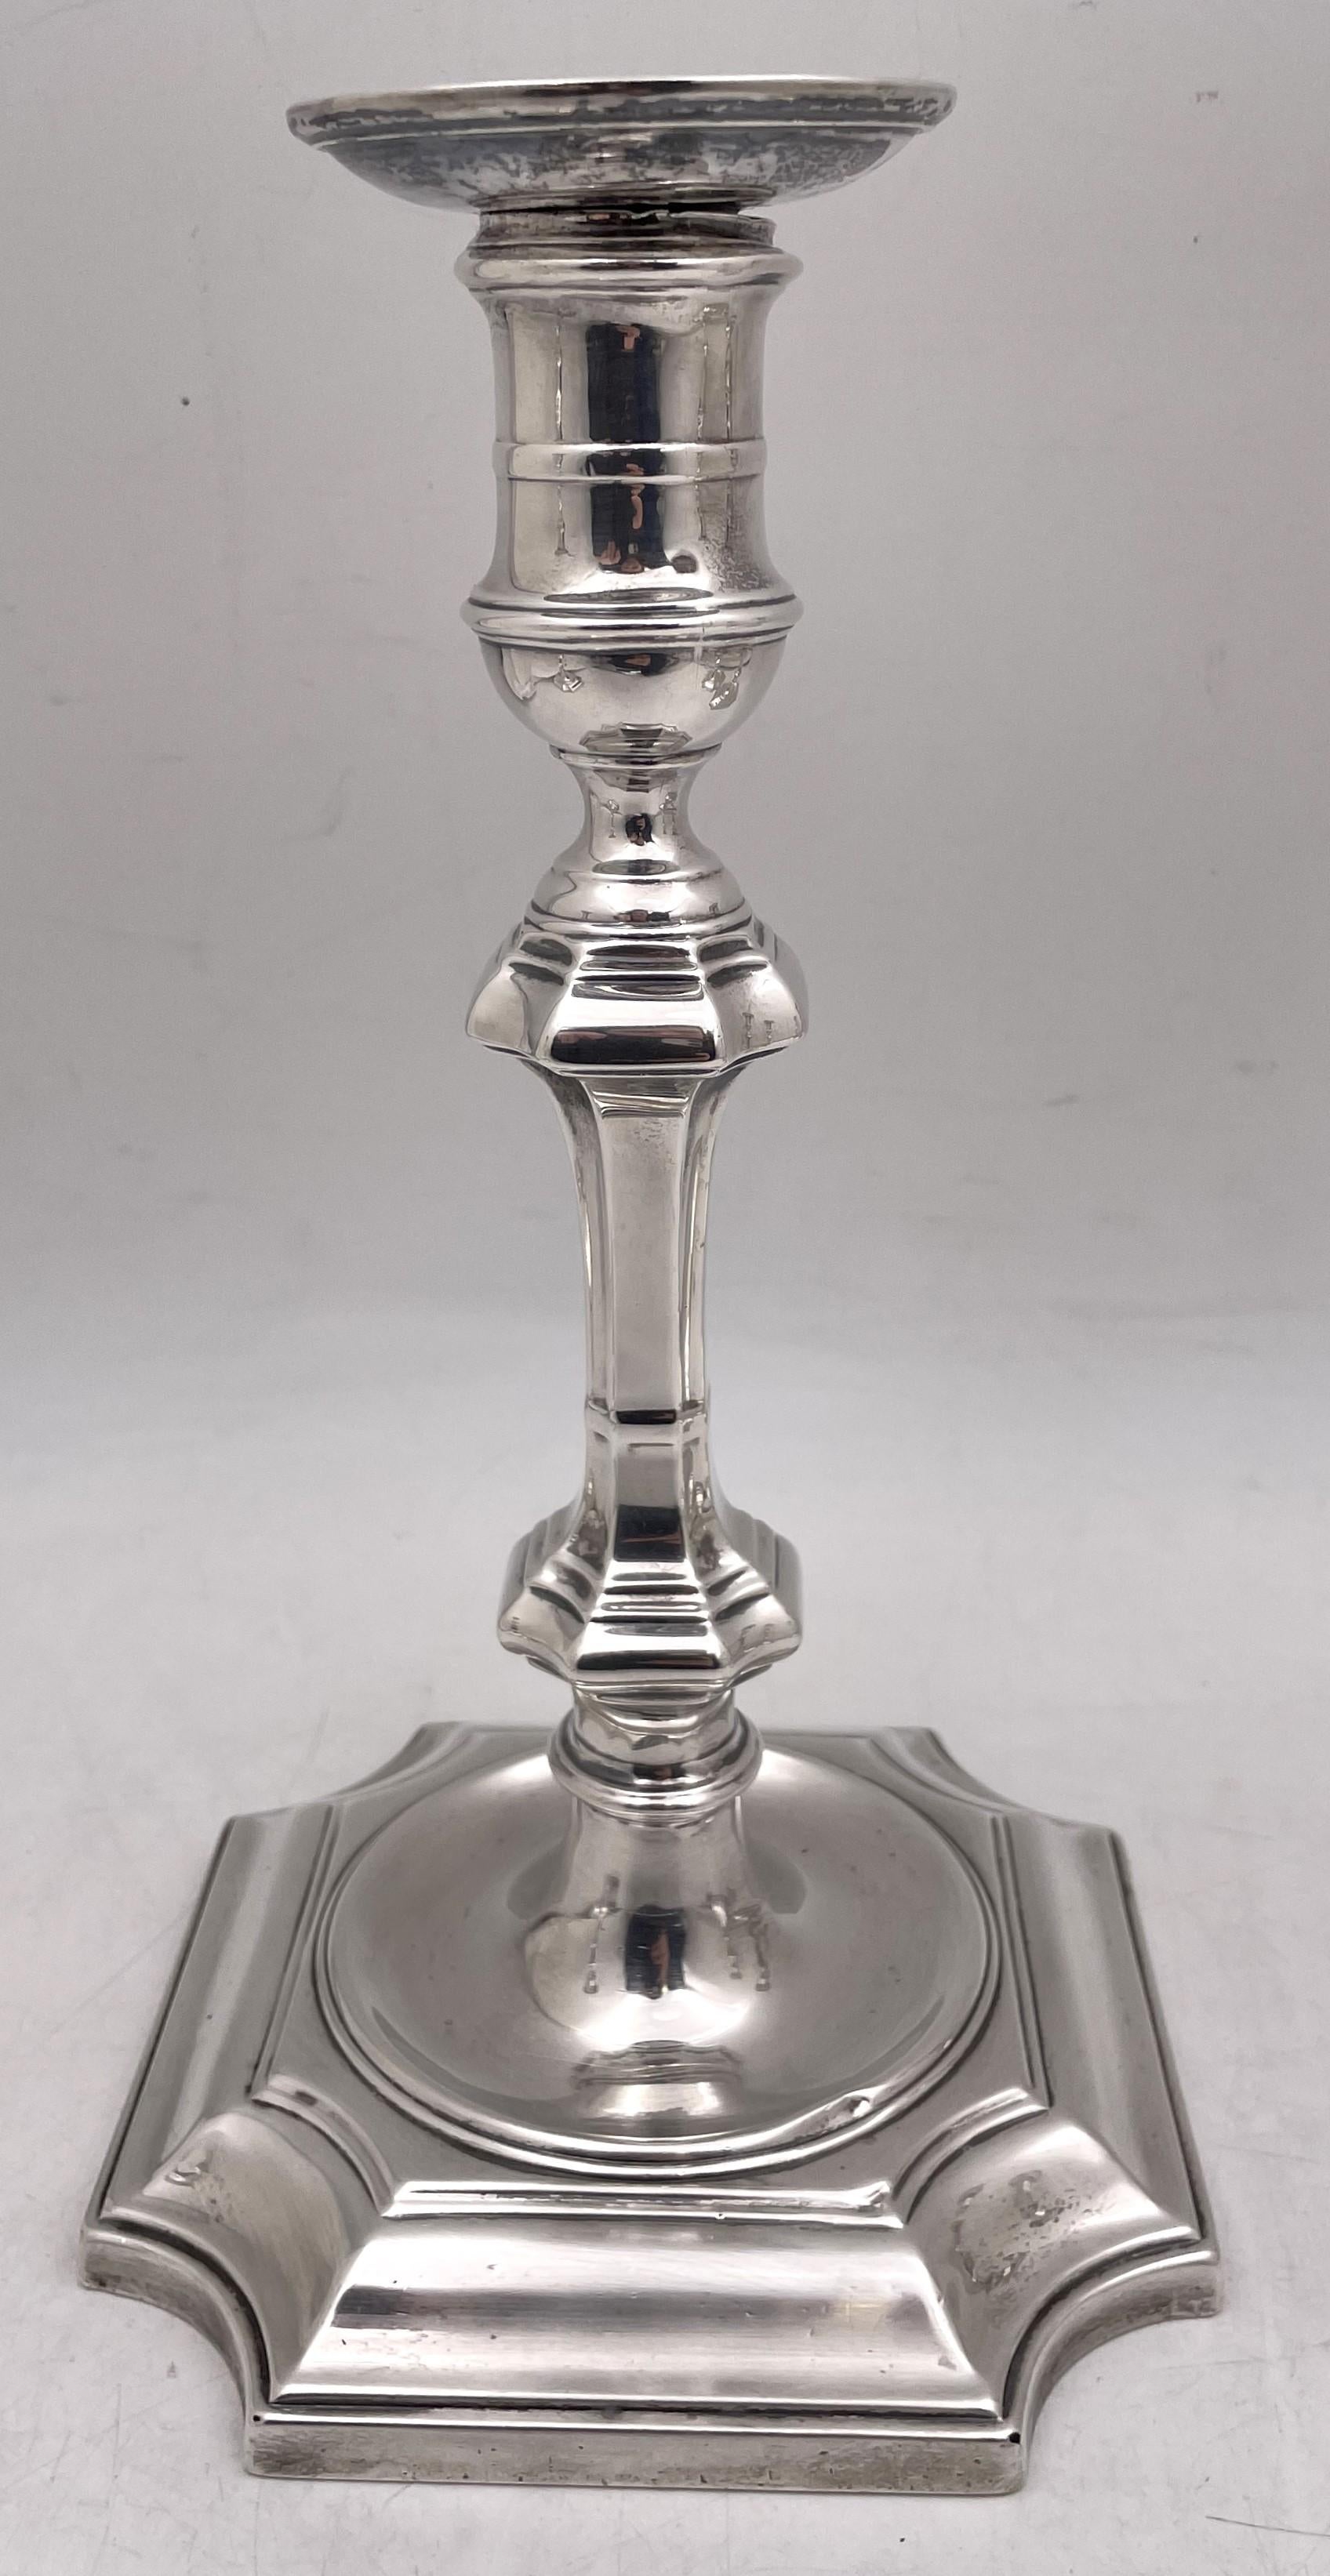 Crichton & Co. set of 4 sterling silver candlesticks in Art Deco style from 1924, with an elegant, geometric design. They measure 10 1/2'' in height by 5 1/2'' in depth at the base, are weighted, and bear hallmarks as shown. 

Crichton & Co. was